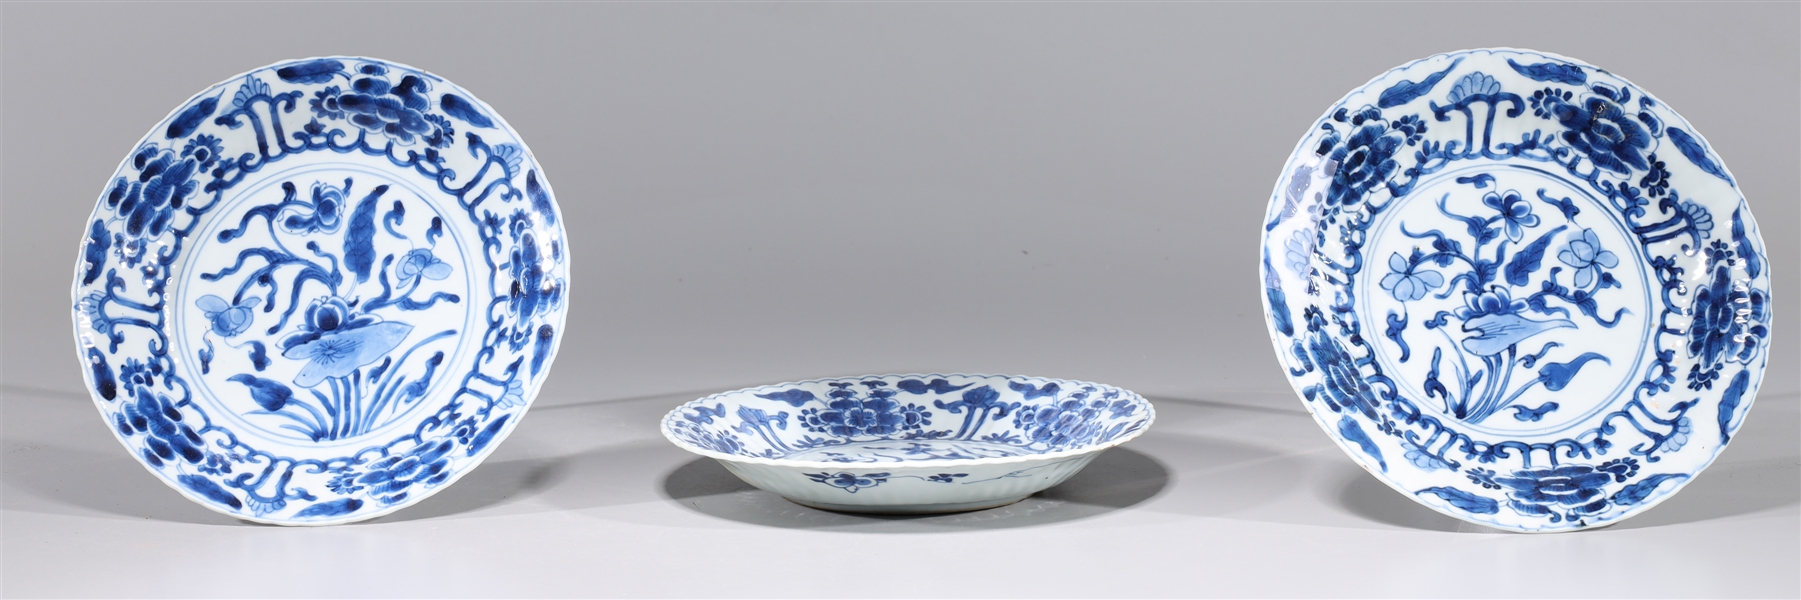 Three antique Chinese blue and